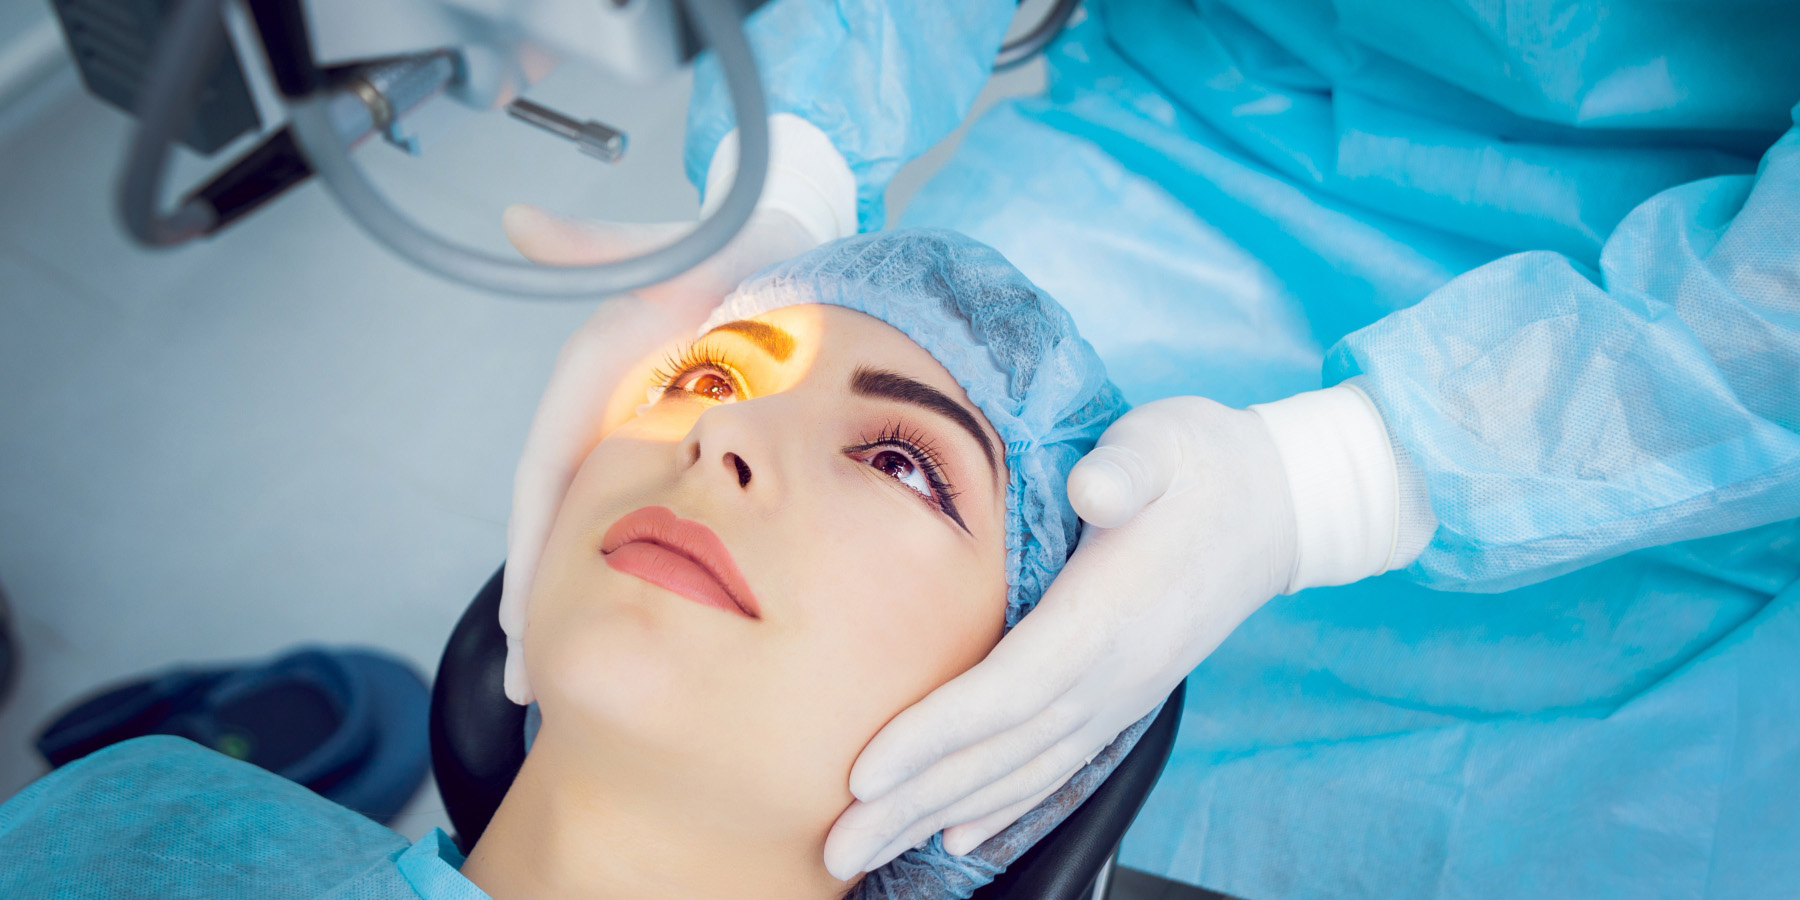 Tips to recover quickly from lasik surgery